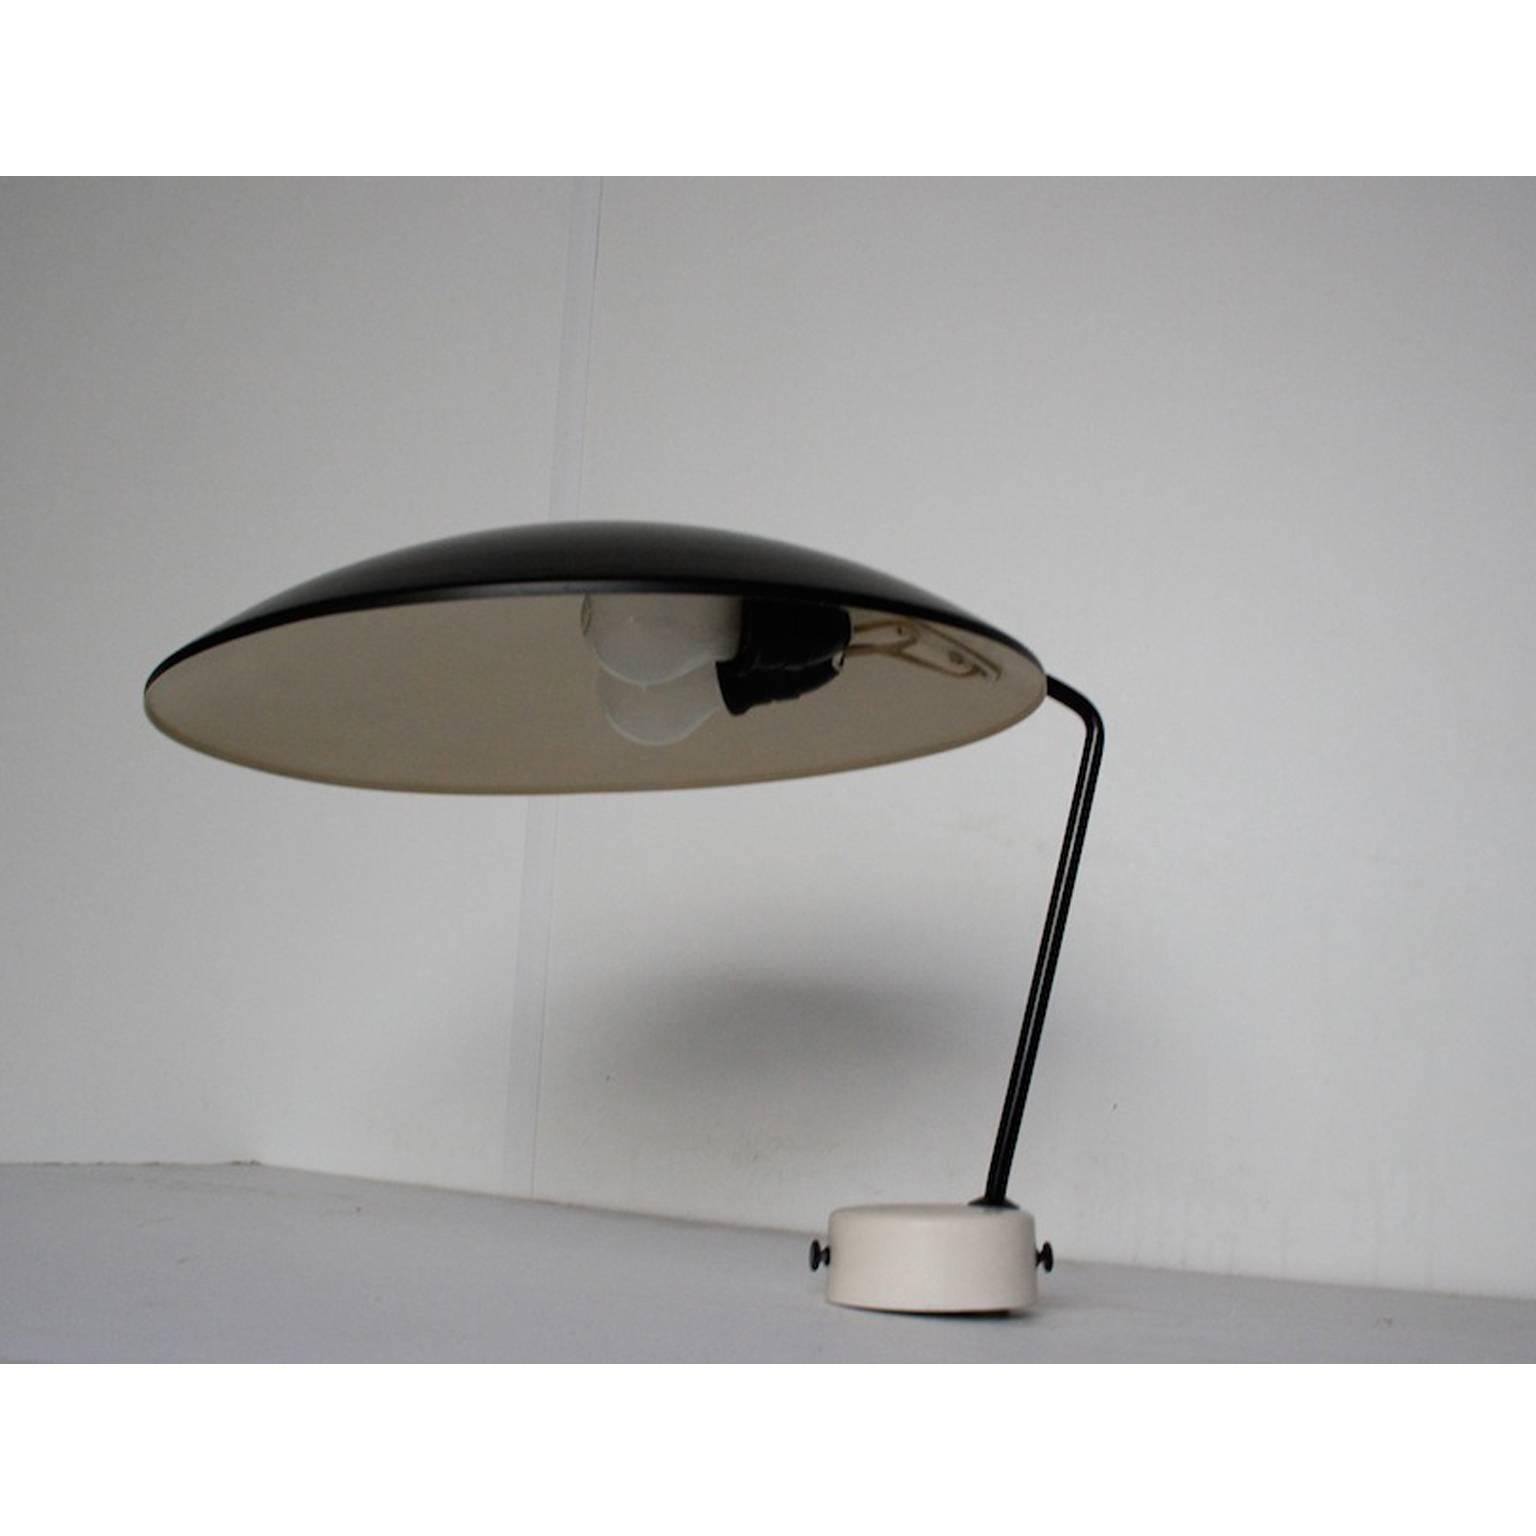 “Model 232” wall or ceiling lamp by Bruno Gatta for Stilnovo, Italy, 1962

Fantastic wall light which could also be used a ceiling light.

This rare item was designed in 1962 by Bruno Gatta for Stilnovo. Its elegant design will still make a nice